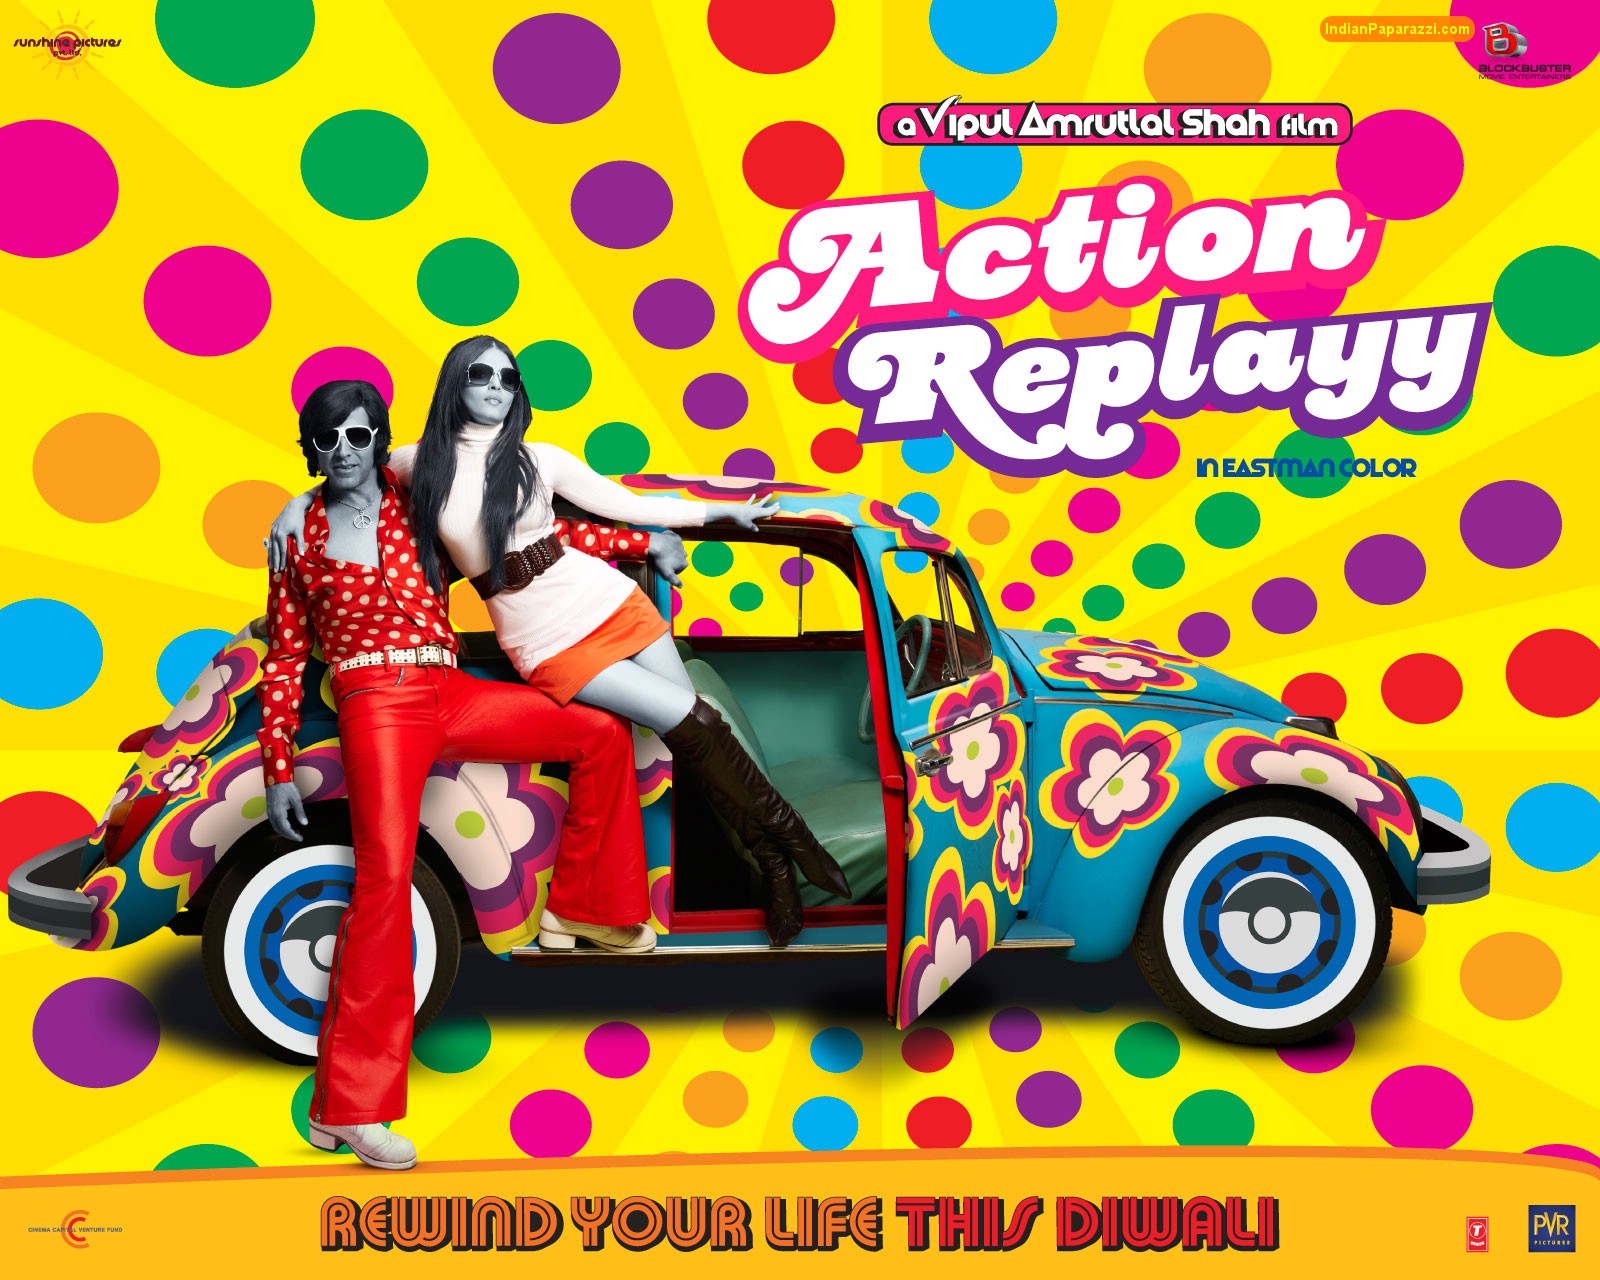 Hindi movie Action Replayy Wallpapers size : 1600X 1200 (wide screen )